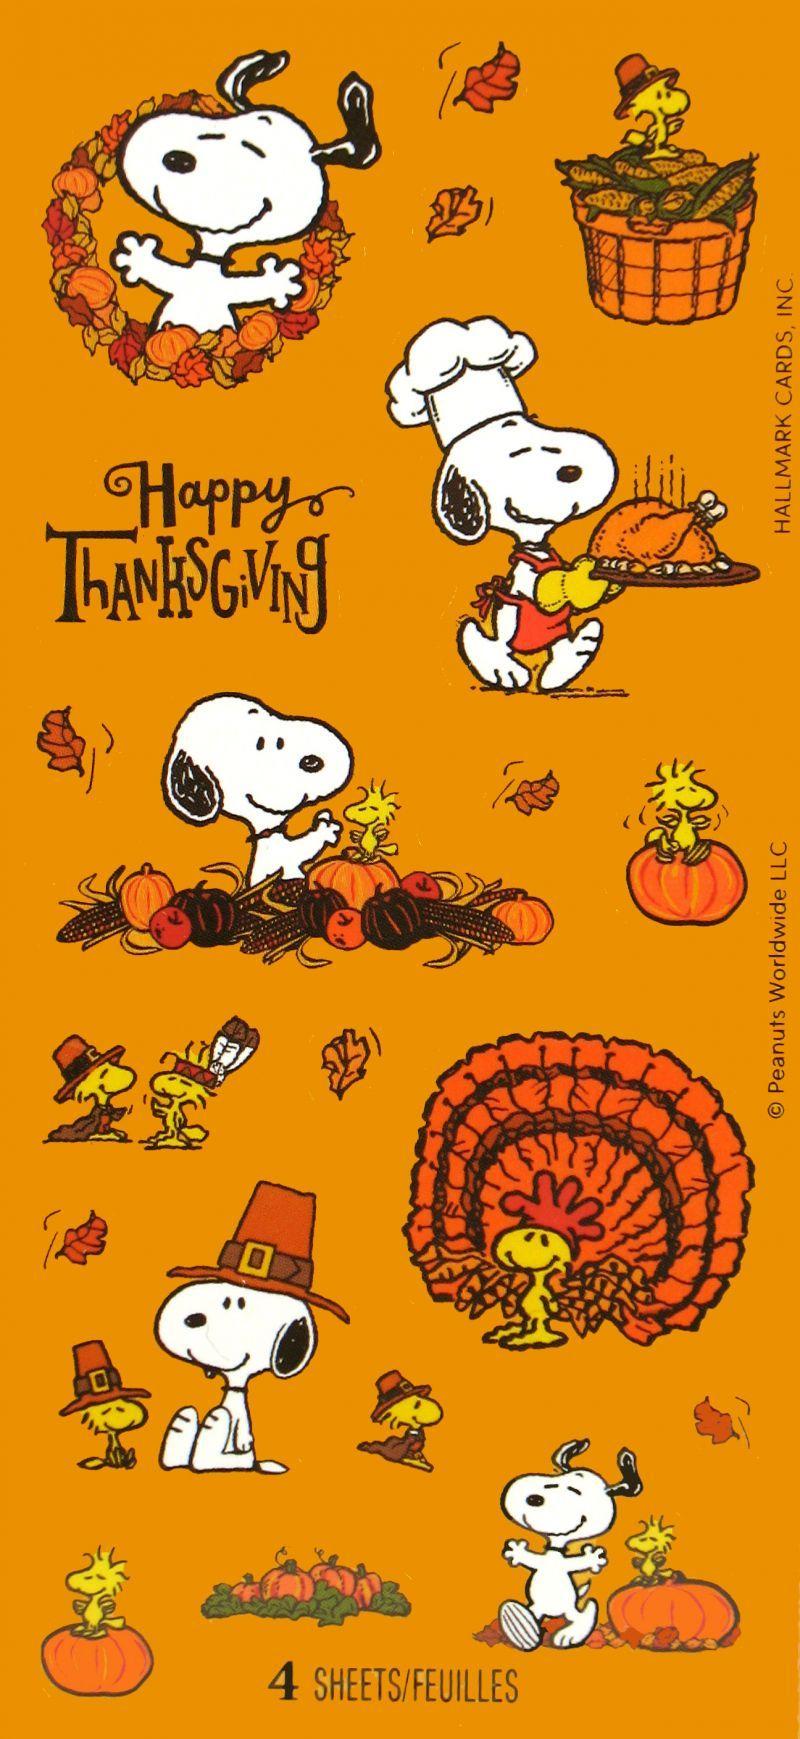 (800×1739). Snoopy wallpaper, Snoopy halloween, Thanksgiving snoopy